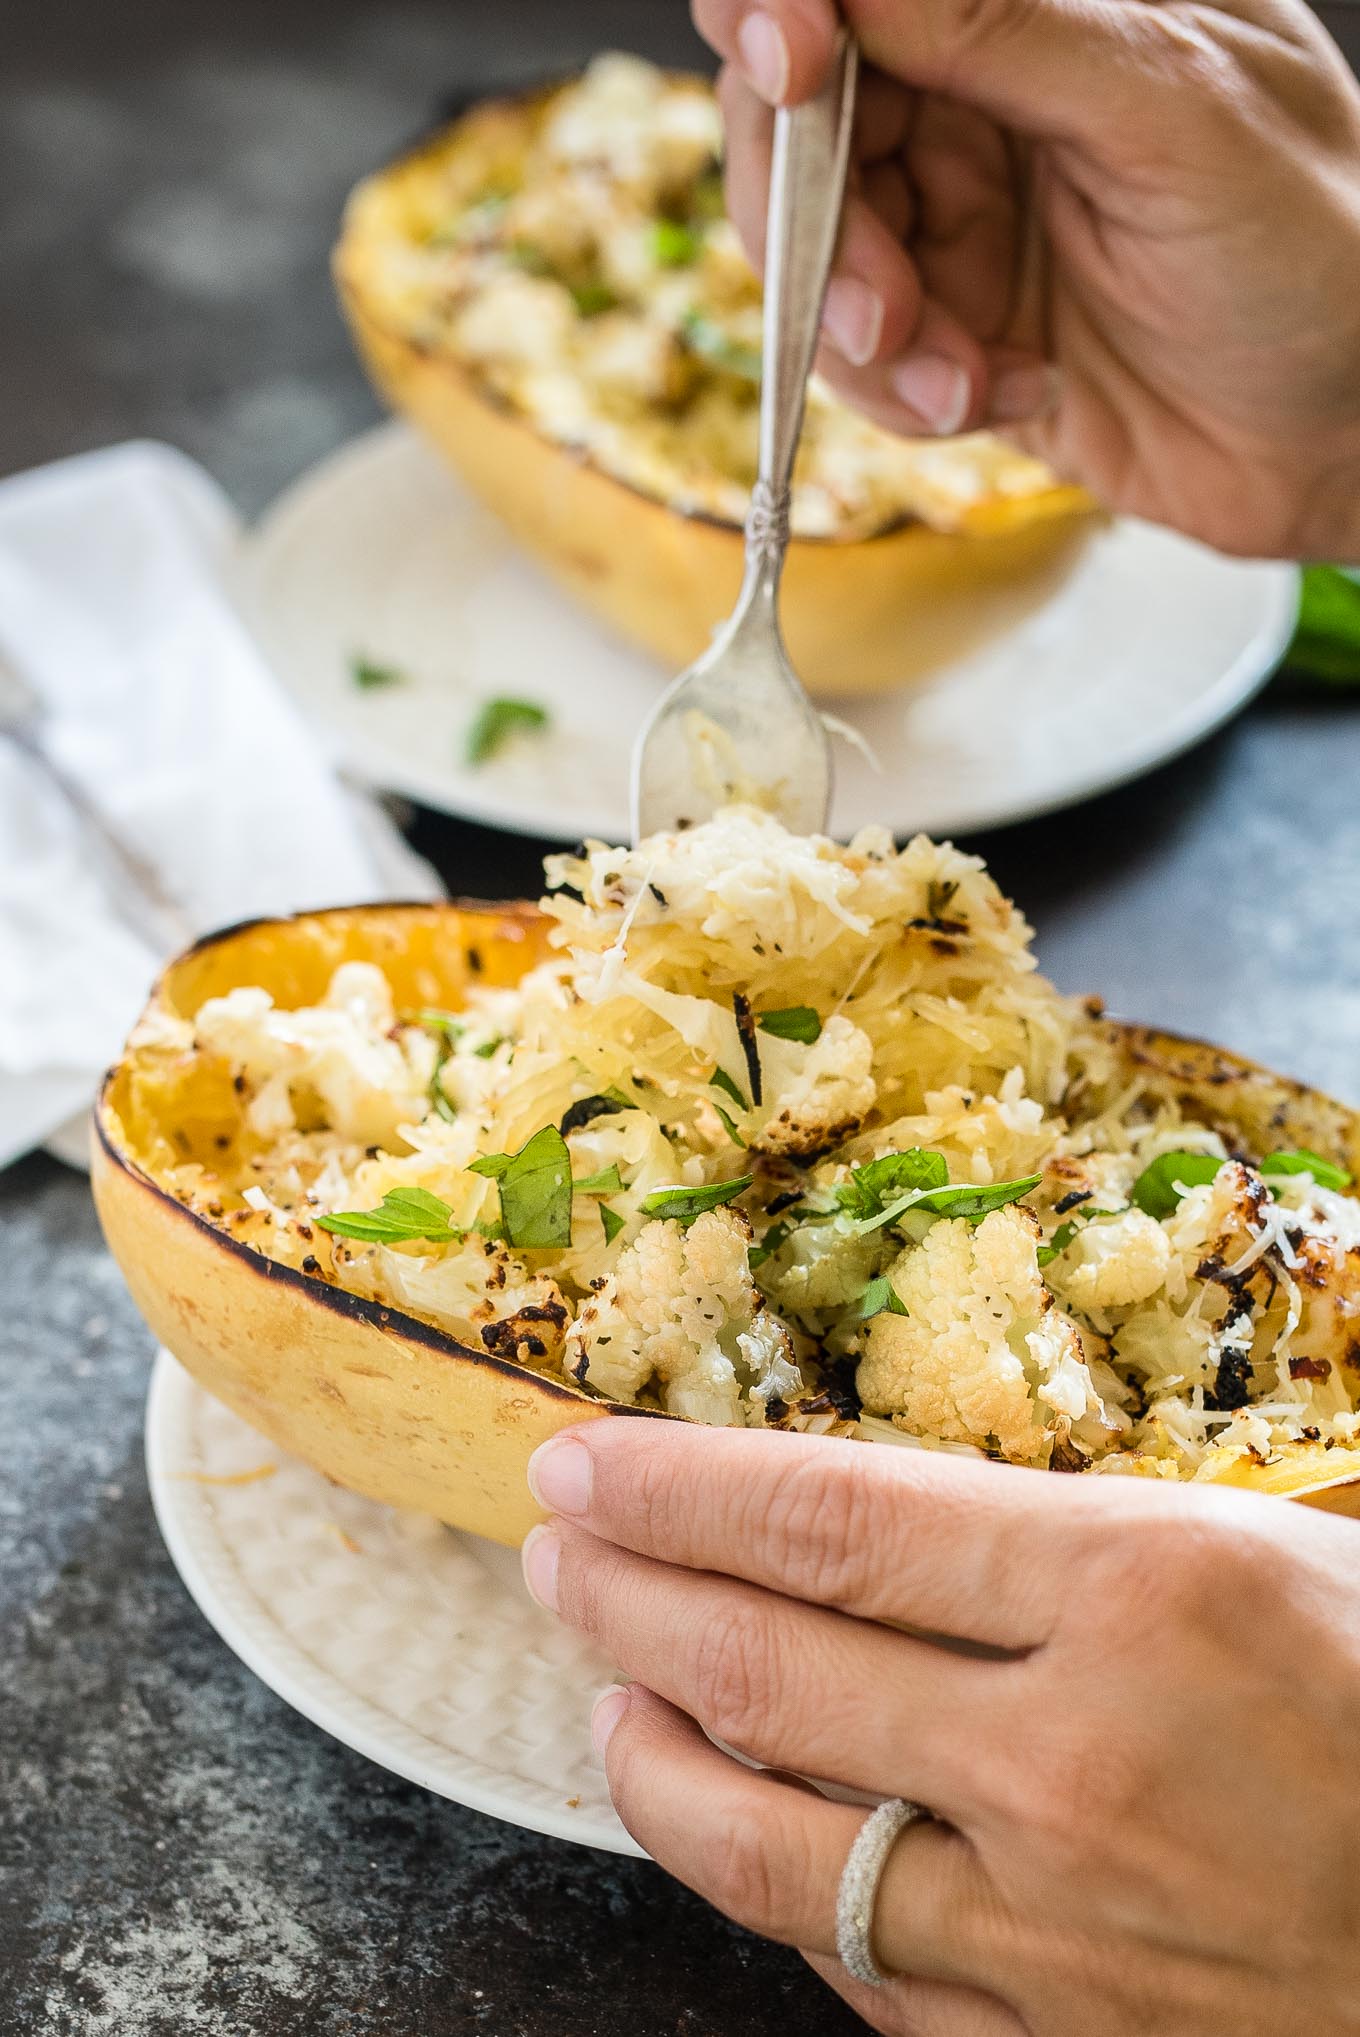 Cheesy Roasted Cauliflower Spaghetti Squash Boats make a great vegetarian meal or side dish, packed with garlicky cauliflower and cheesy goodness.